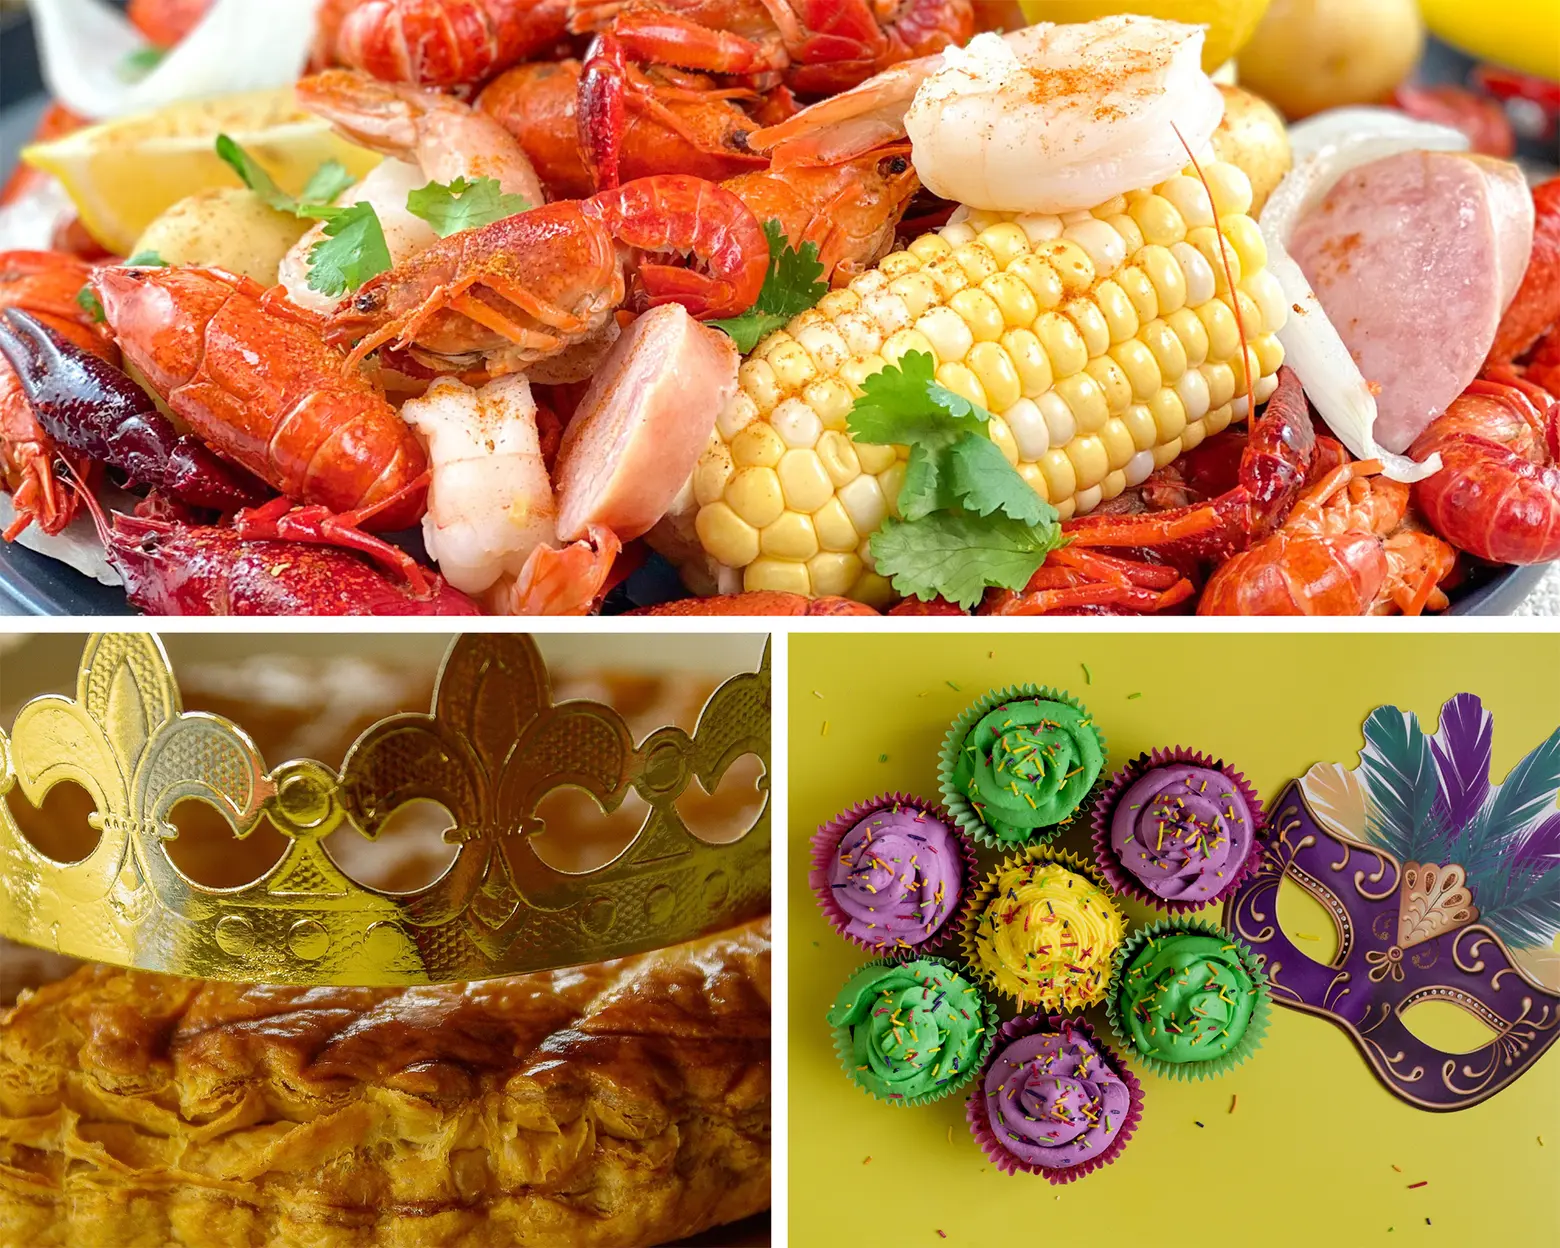 King Cake, crawfish, and more: How to celebrate Mardi Gras 2021 in NYC